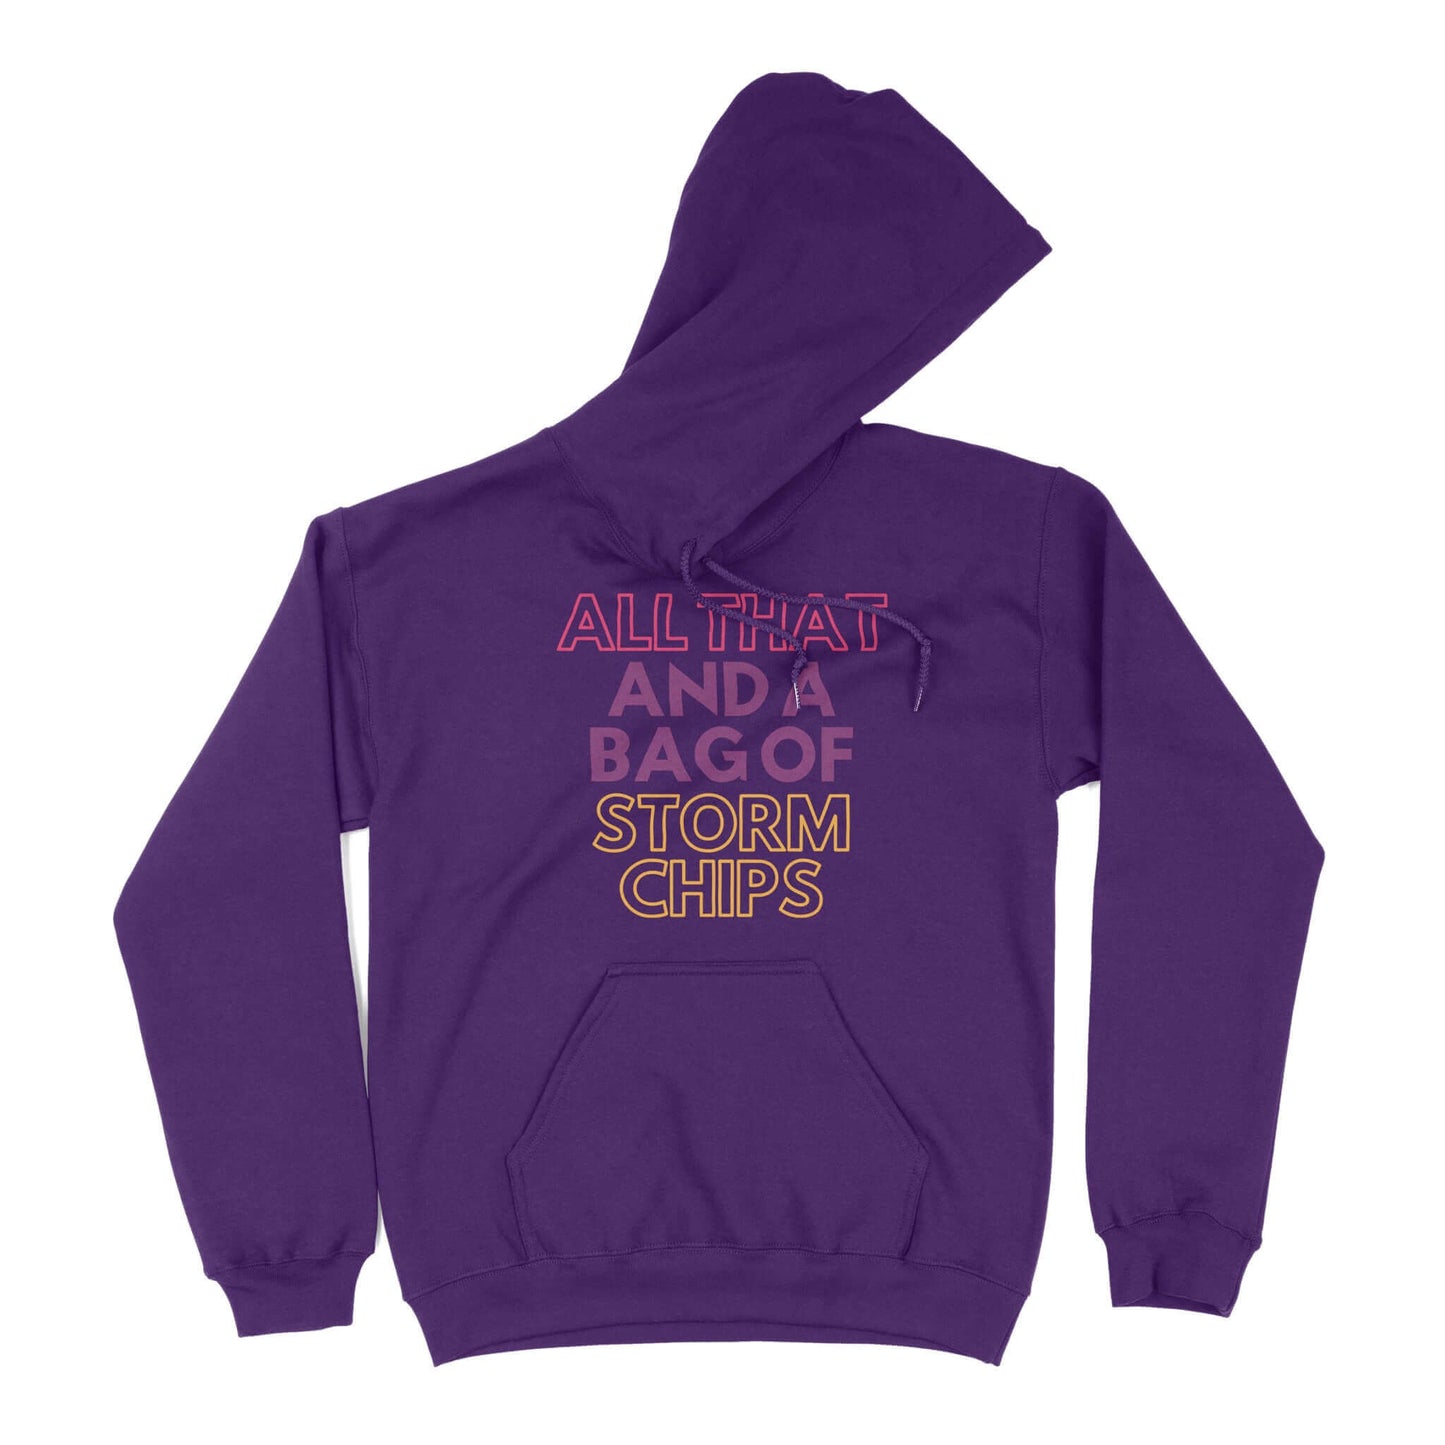 All That and a Bag of Storm Chips Unisex Hoodie in Color: Purple - East Coast AF Apparel